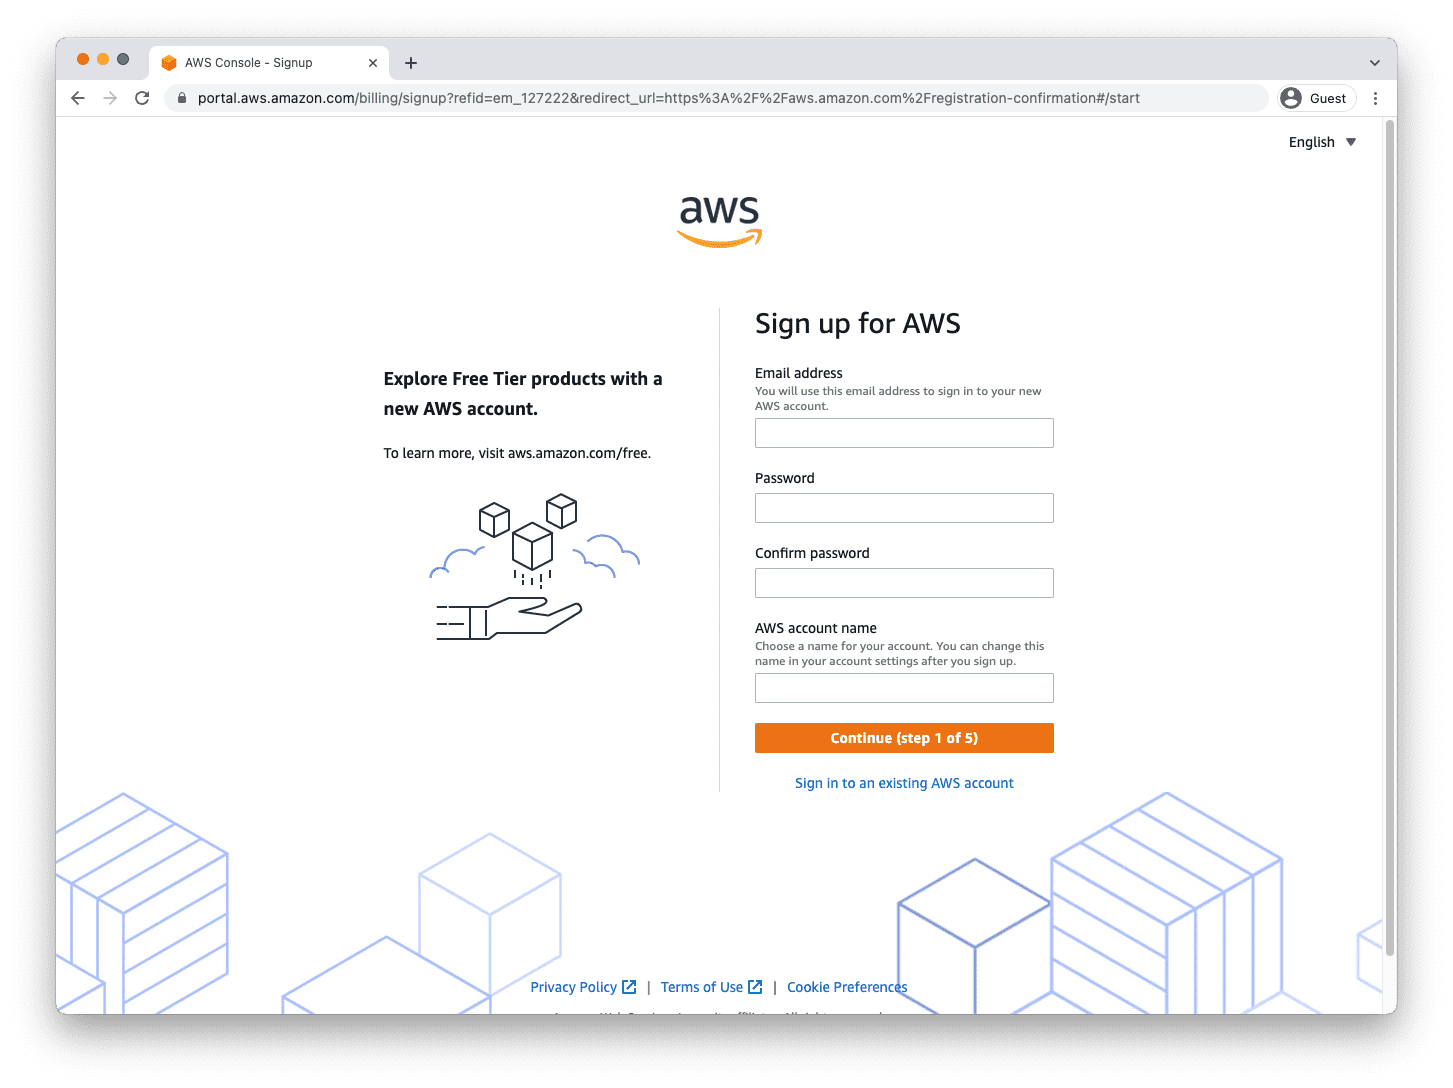 AWS free tier sign up form